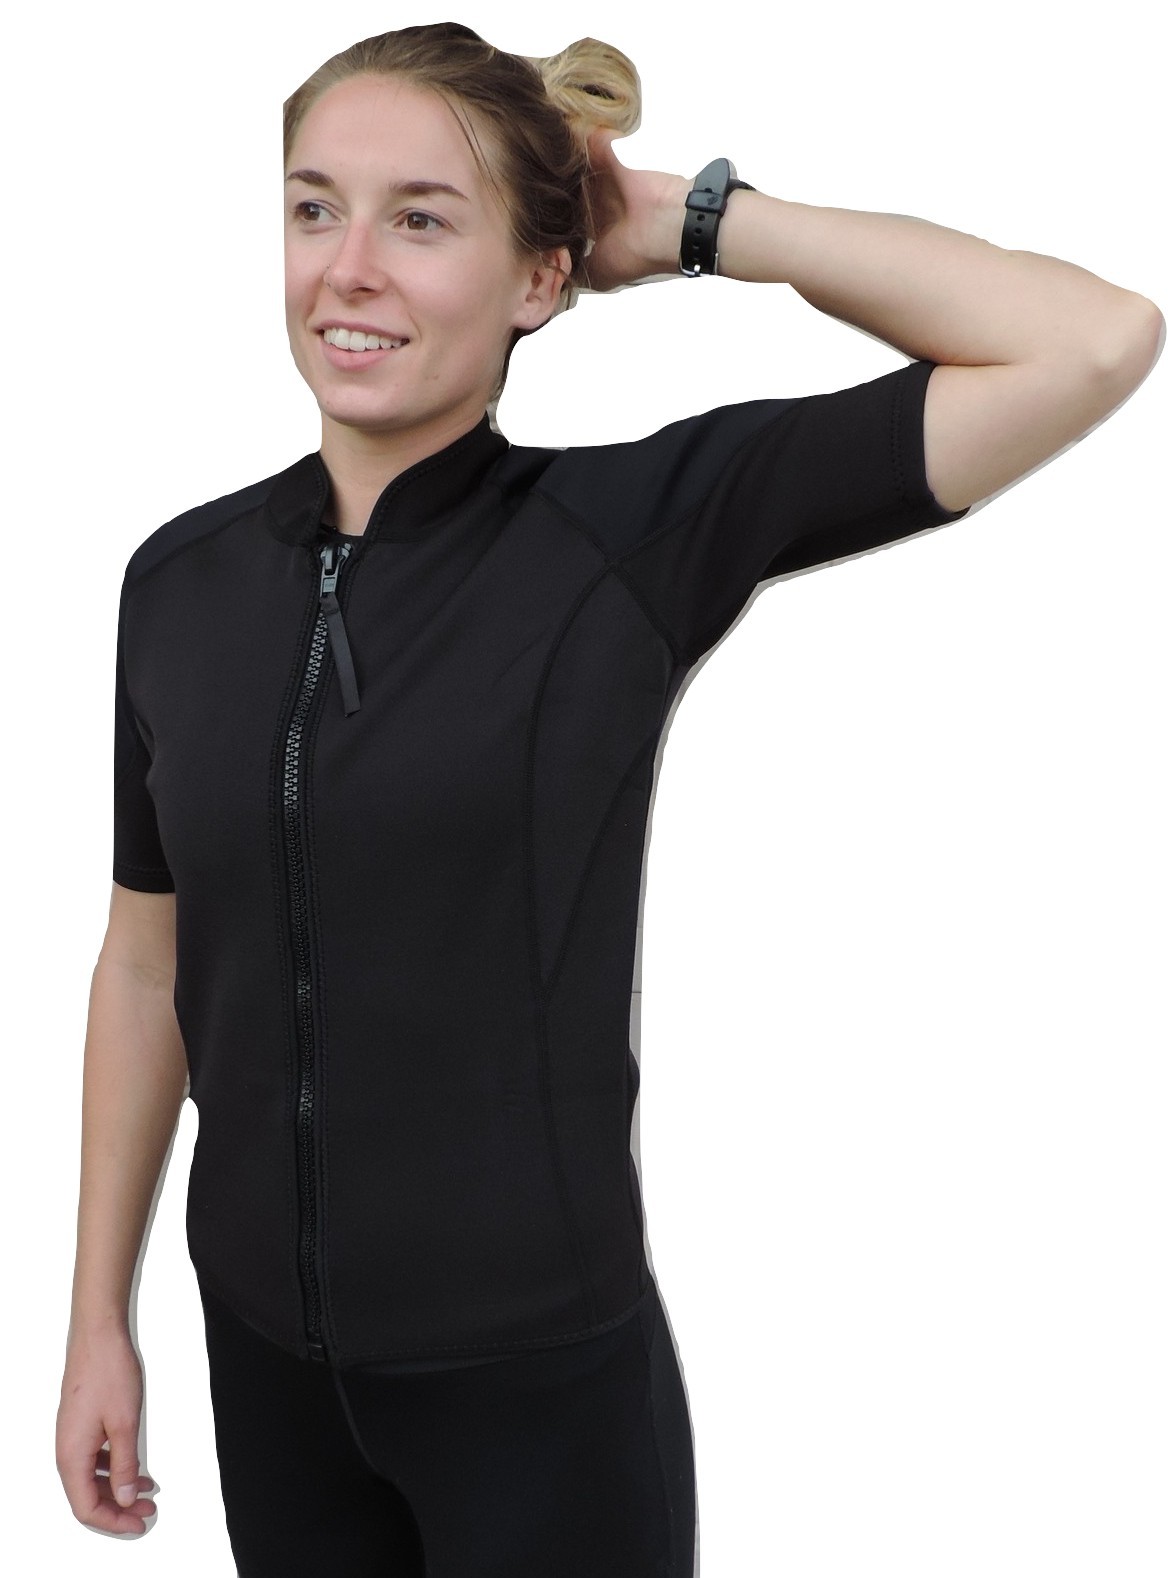 Warmth & Protection Sizes:S-2XL Full Front Zipper Women’s 2mm Wetsuit Vest 